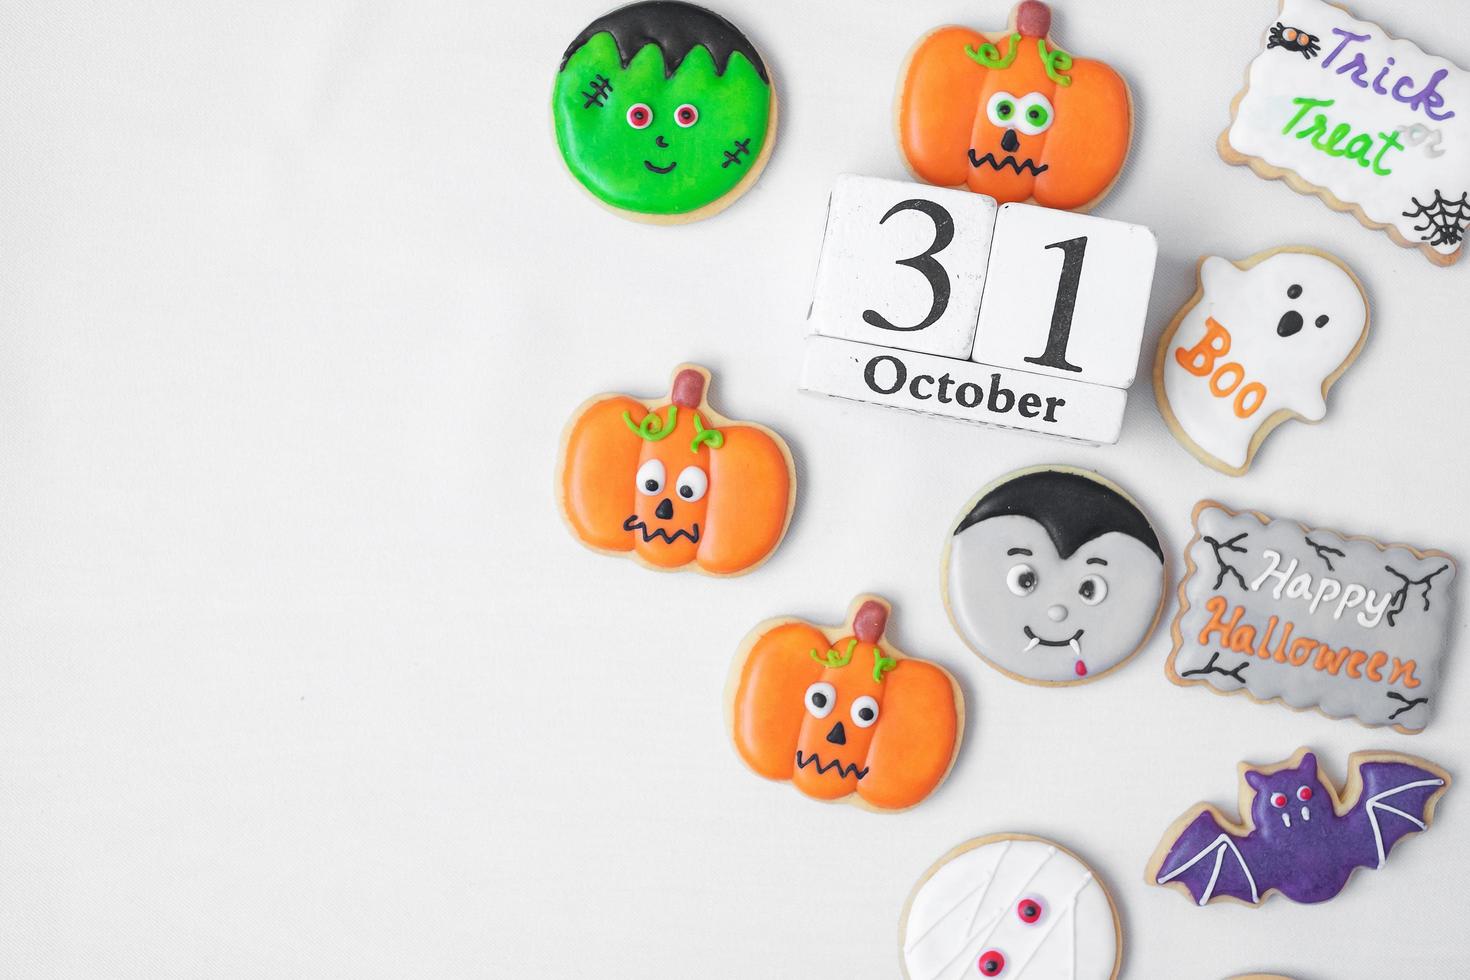 Halloween funny Cookies with 31 October calendar on white background. Trick or Threat, Happy Halloween, Hello October, fall autumn, Festive, party and holiday concept photo